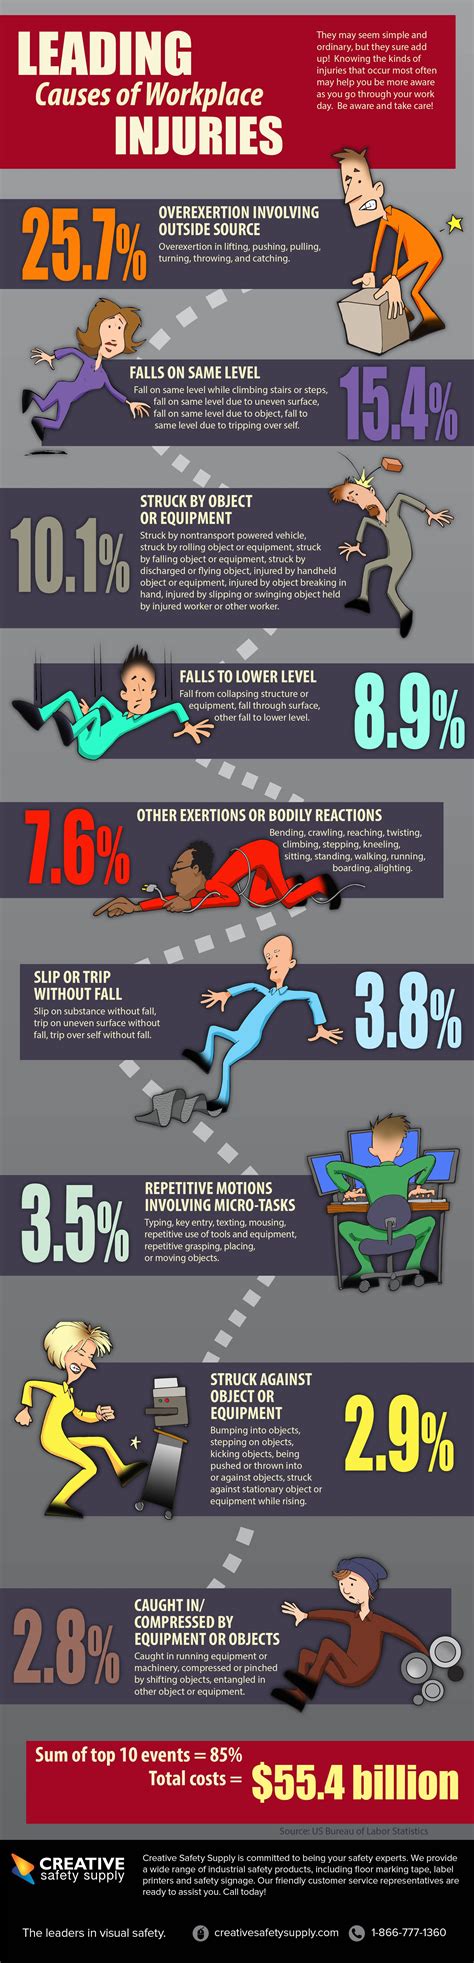 Leading Causes Of Workplace Injuries Infographic Workplace Injuries